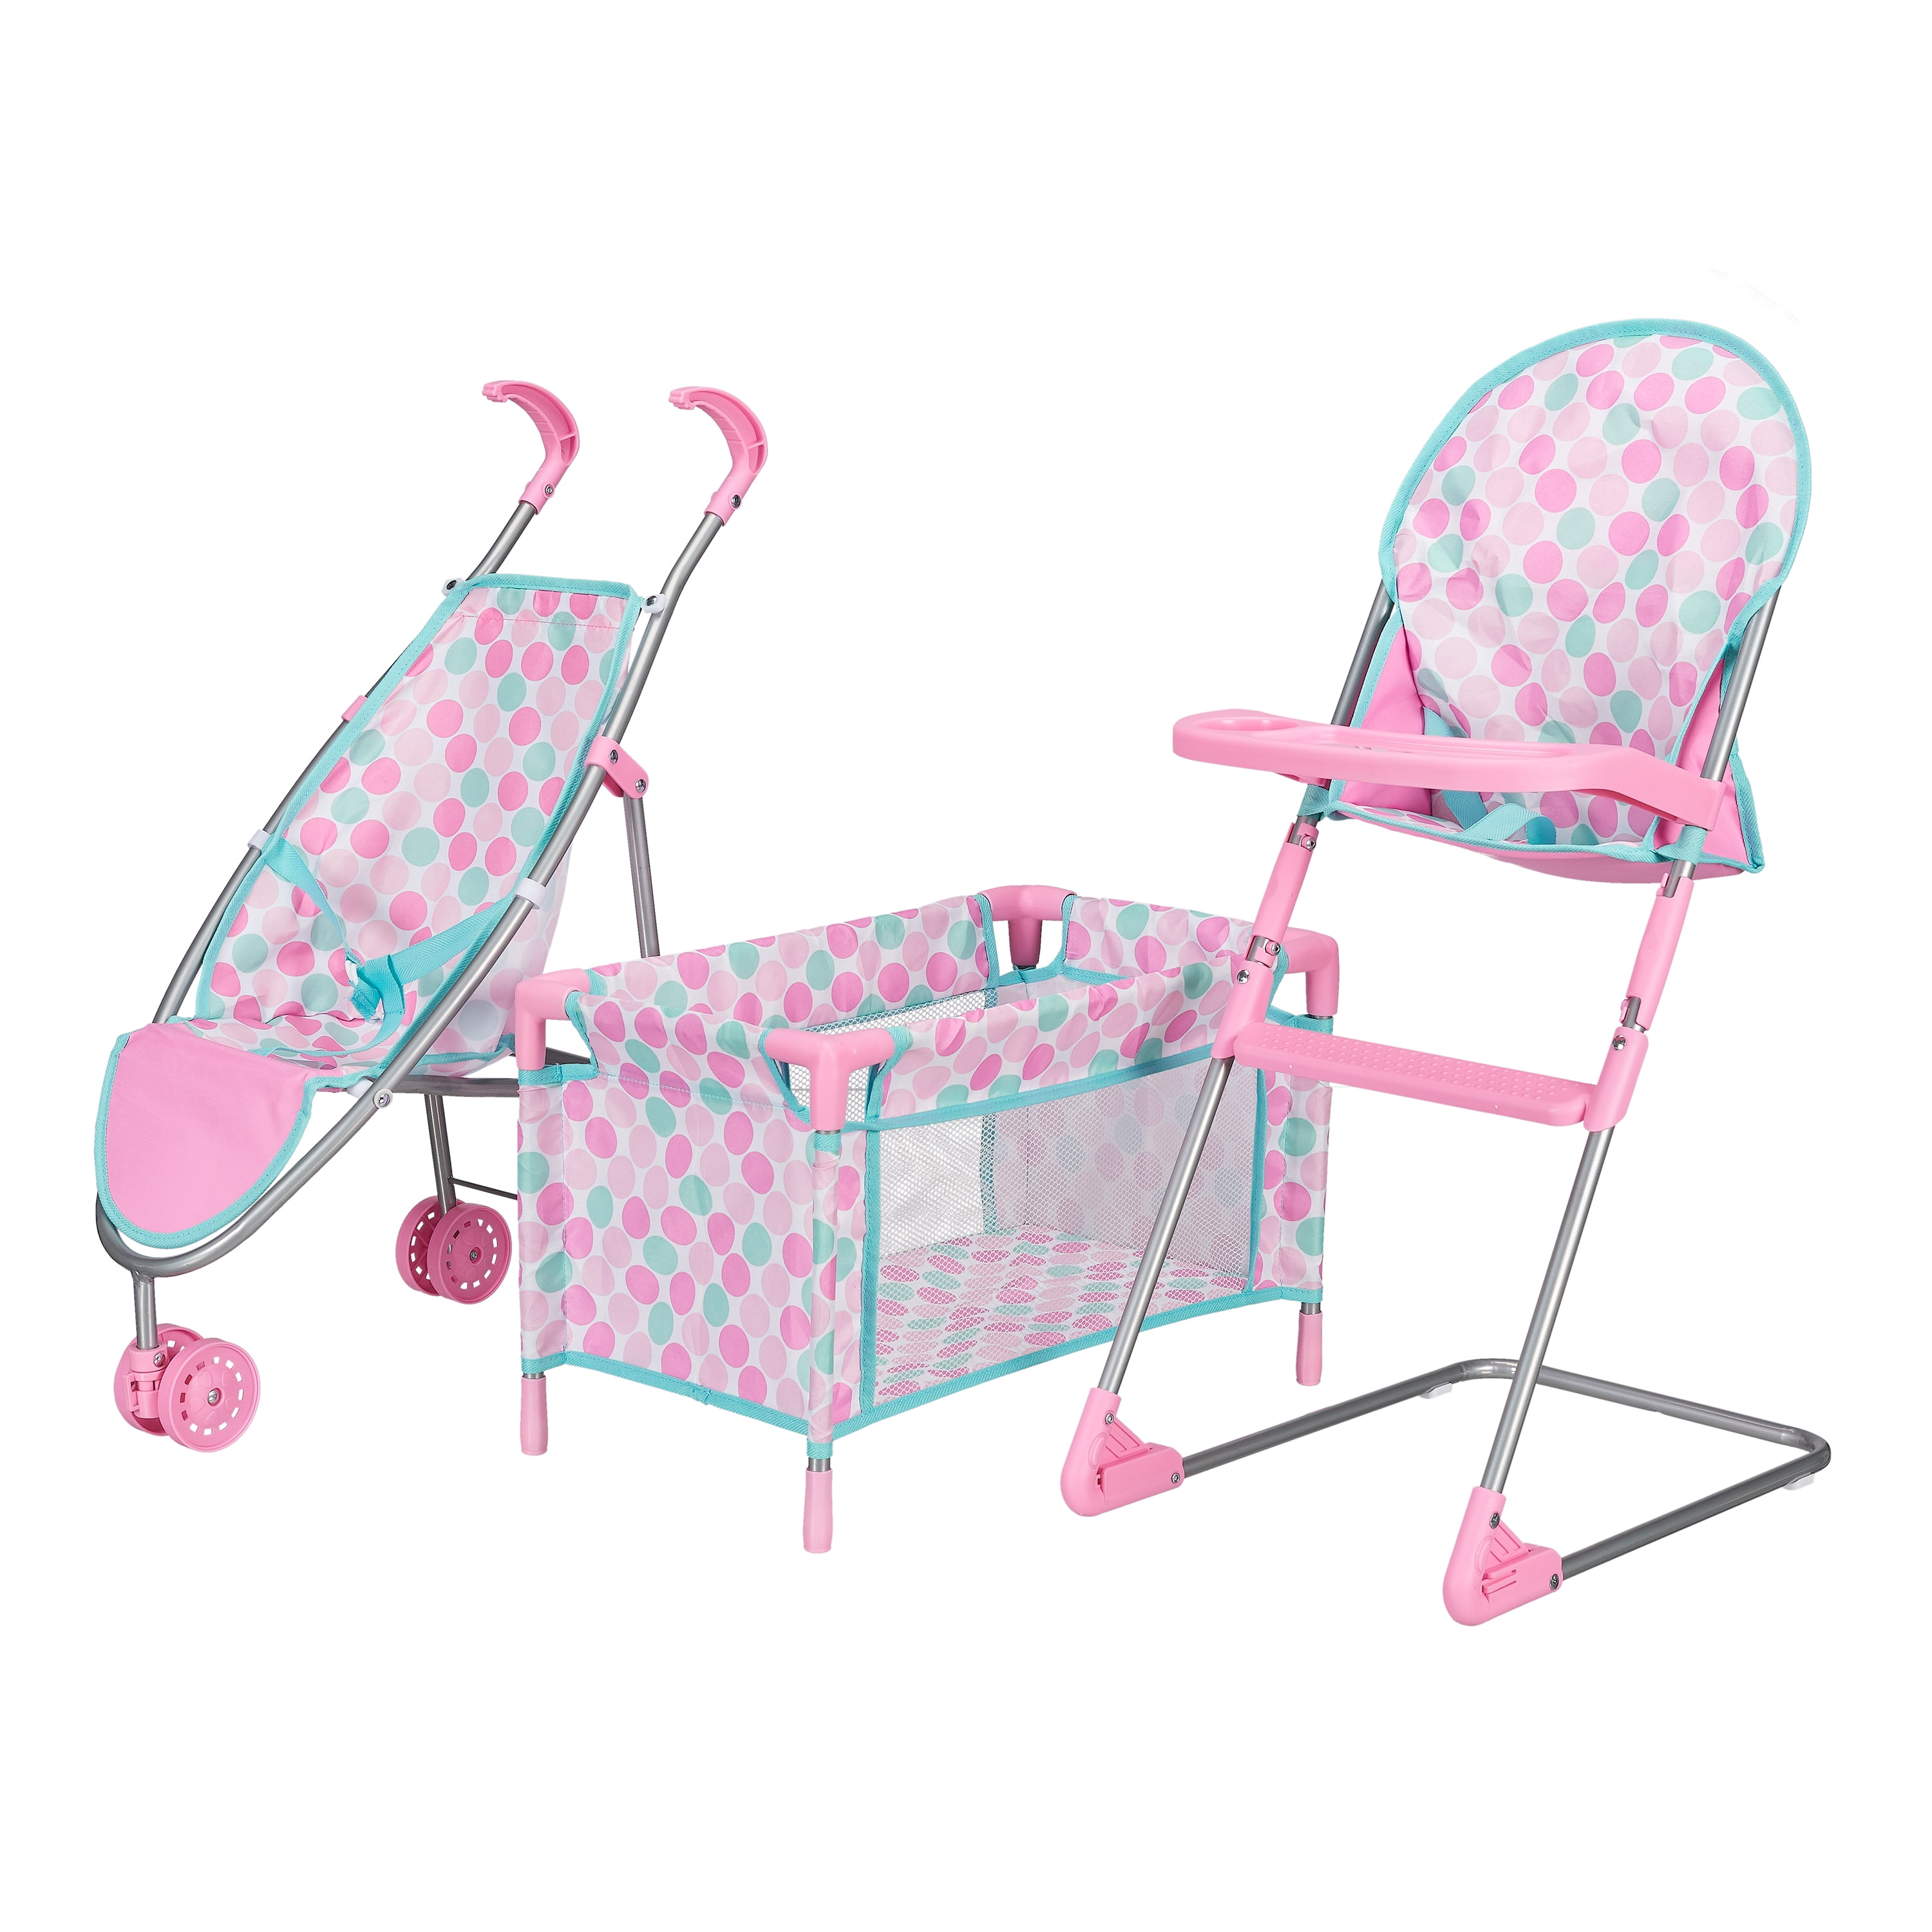 Includes 1 Pack n Play Baby Doll Crib with Carry Bag fash n kolor 3 Piece Baby Doll Accessories Set 2 Baby High Chair 3 Bouncer